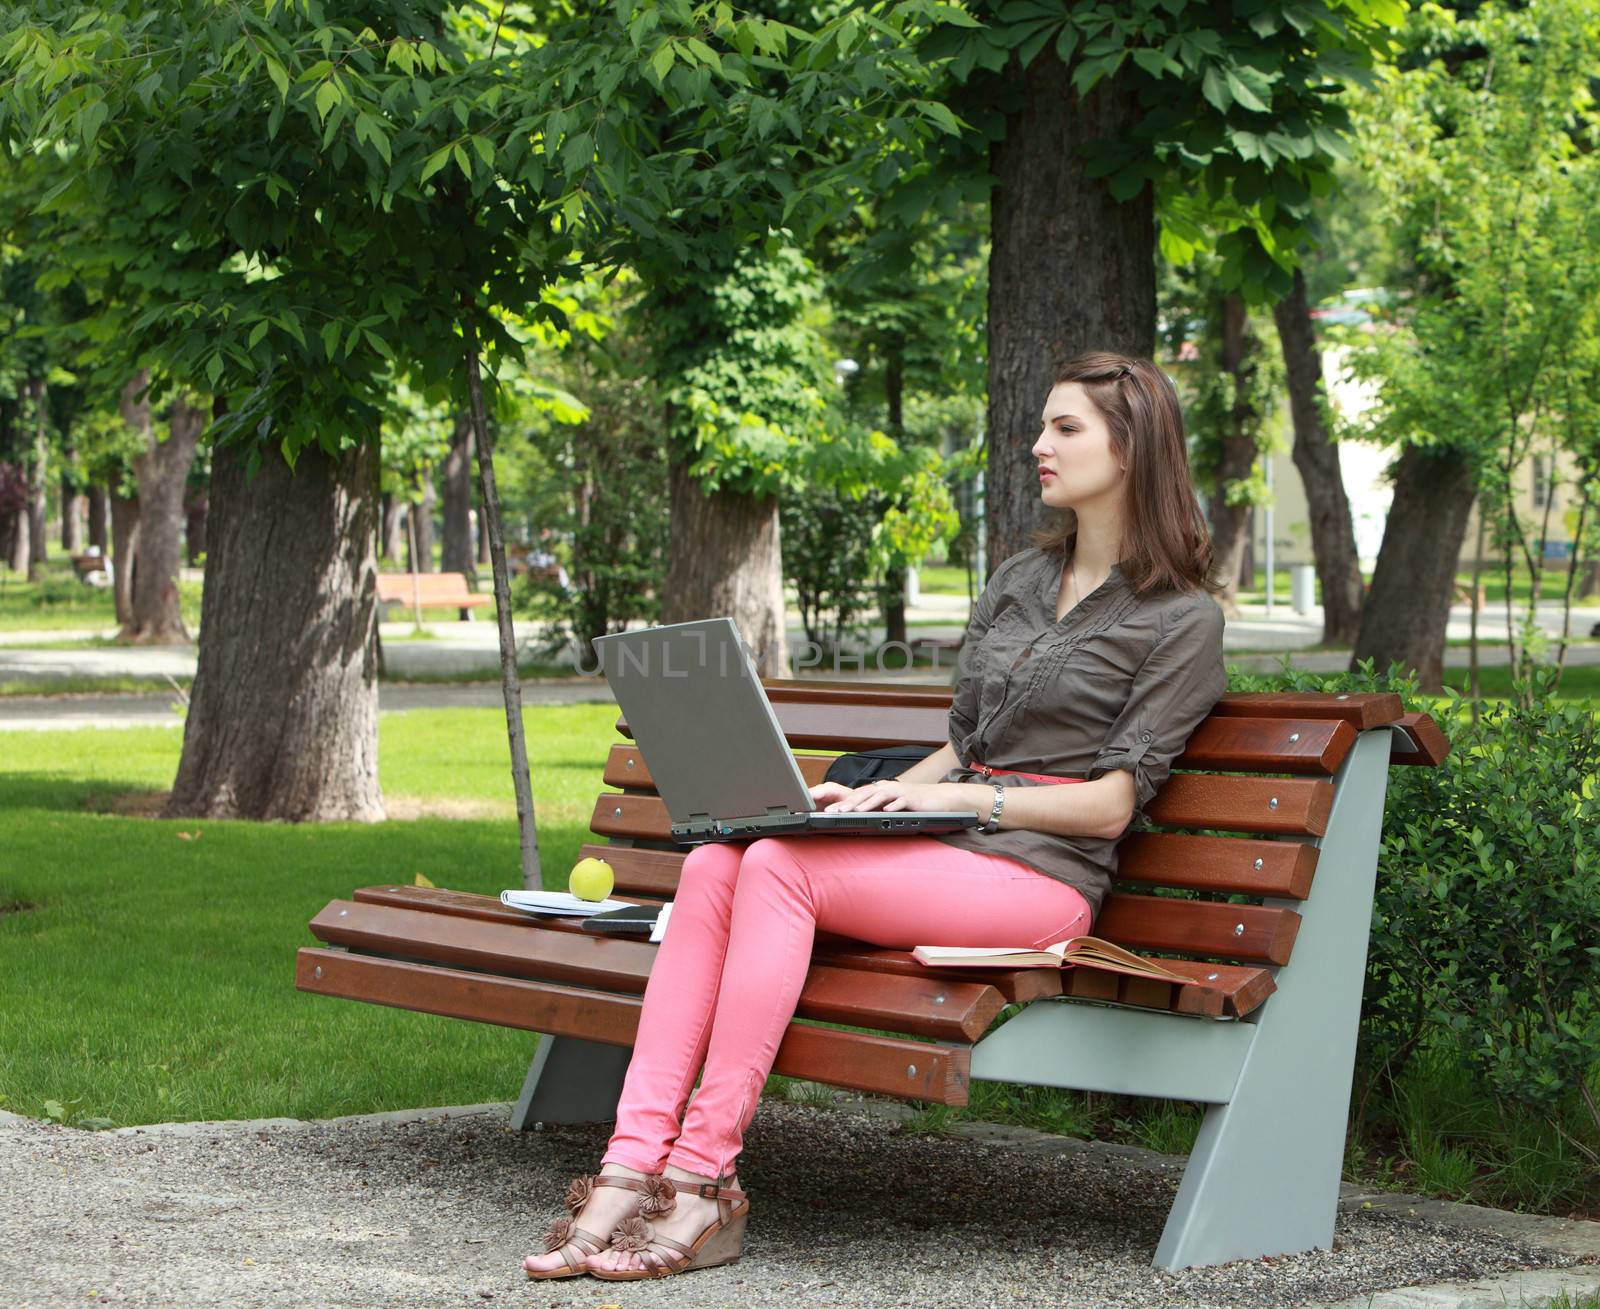 Young woman sitting on a bench in a park and working on a laptop.